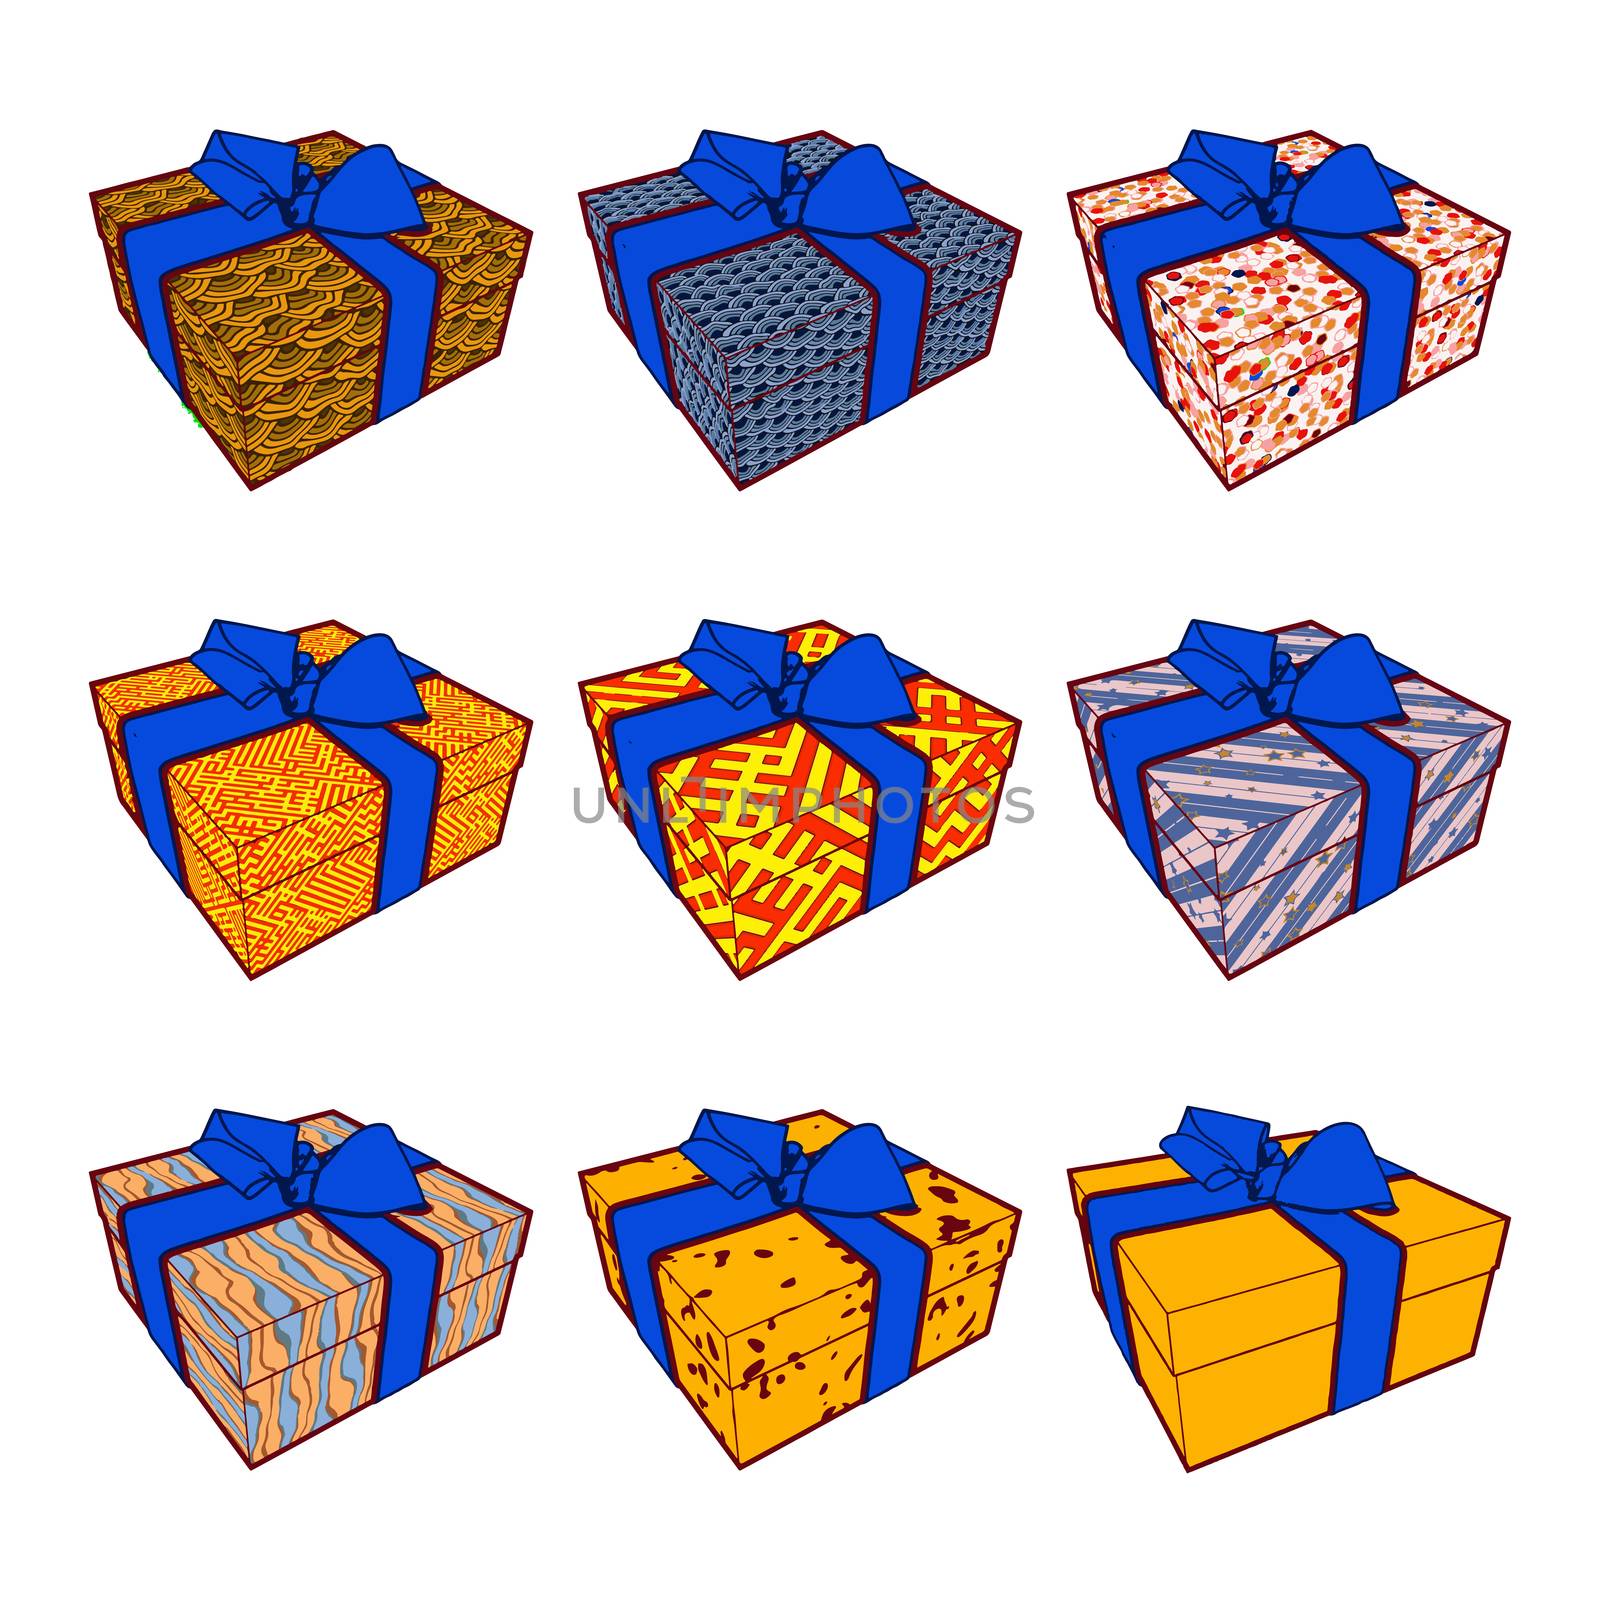 Set of colorful gift boxes with bows and ribbons. illustration collection.